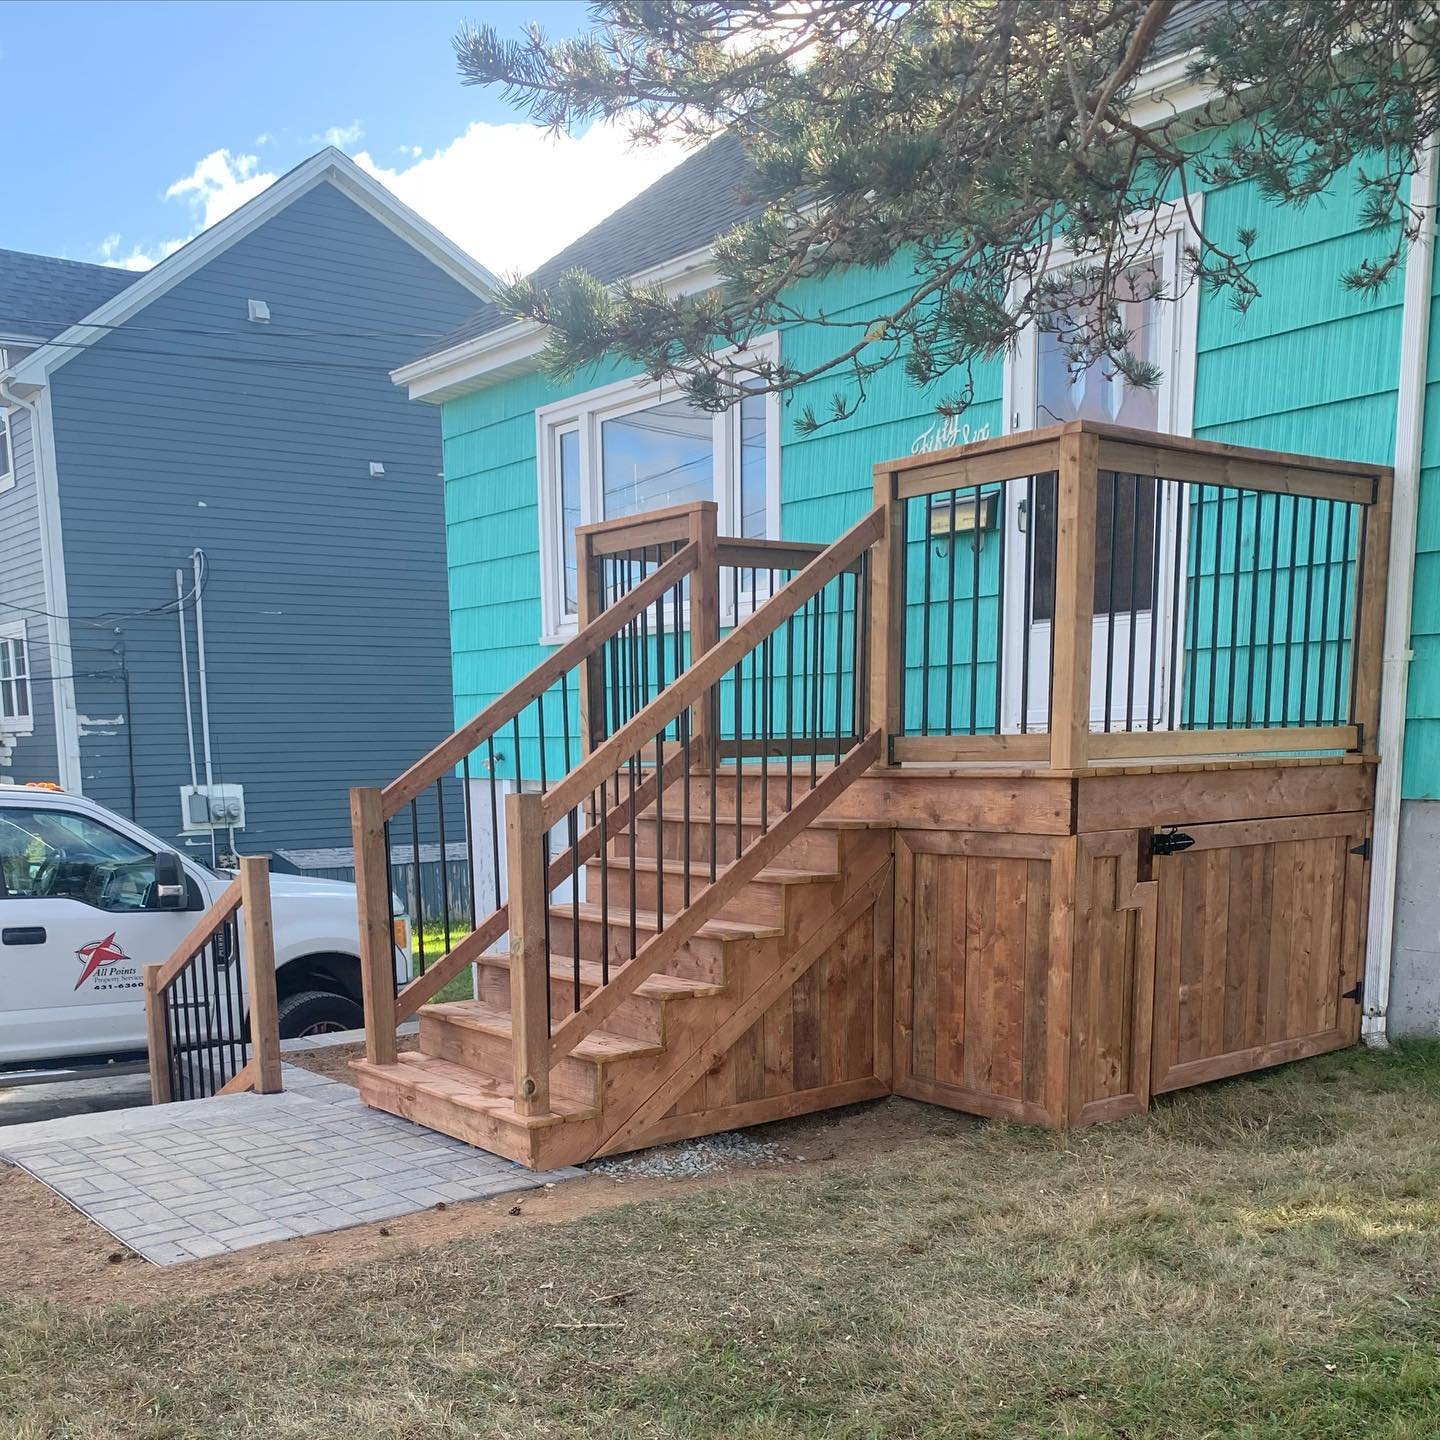 Small pressure treated deck completed to revamp the front entrance.
 
#deck #landscape #hardscape #landscapephotography #contractor #work #woodworking #stairs